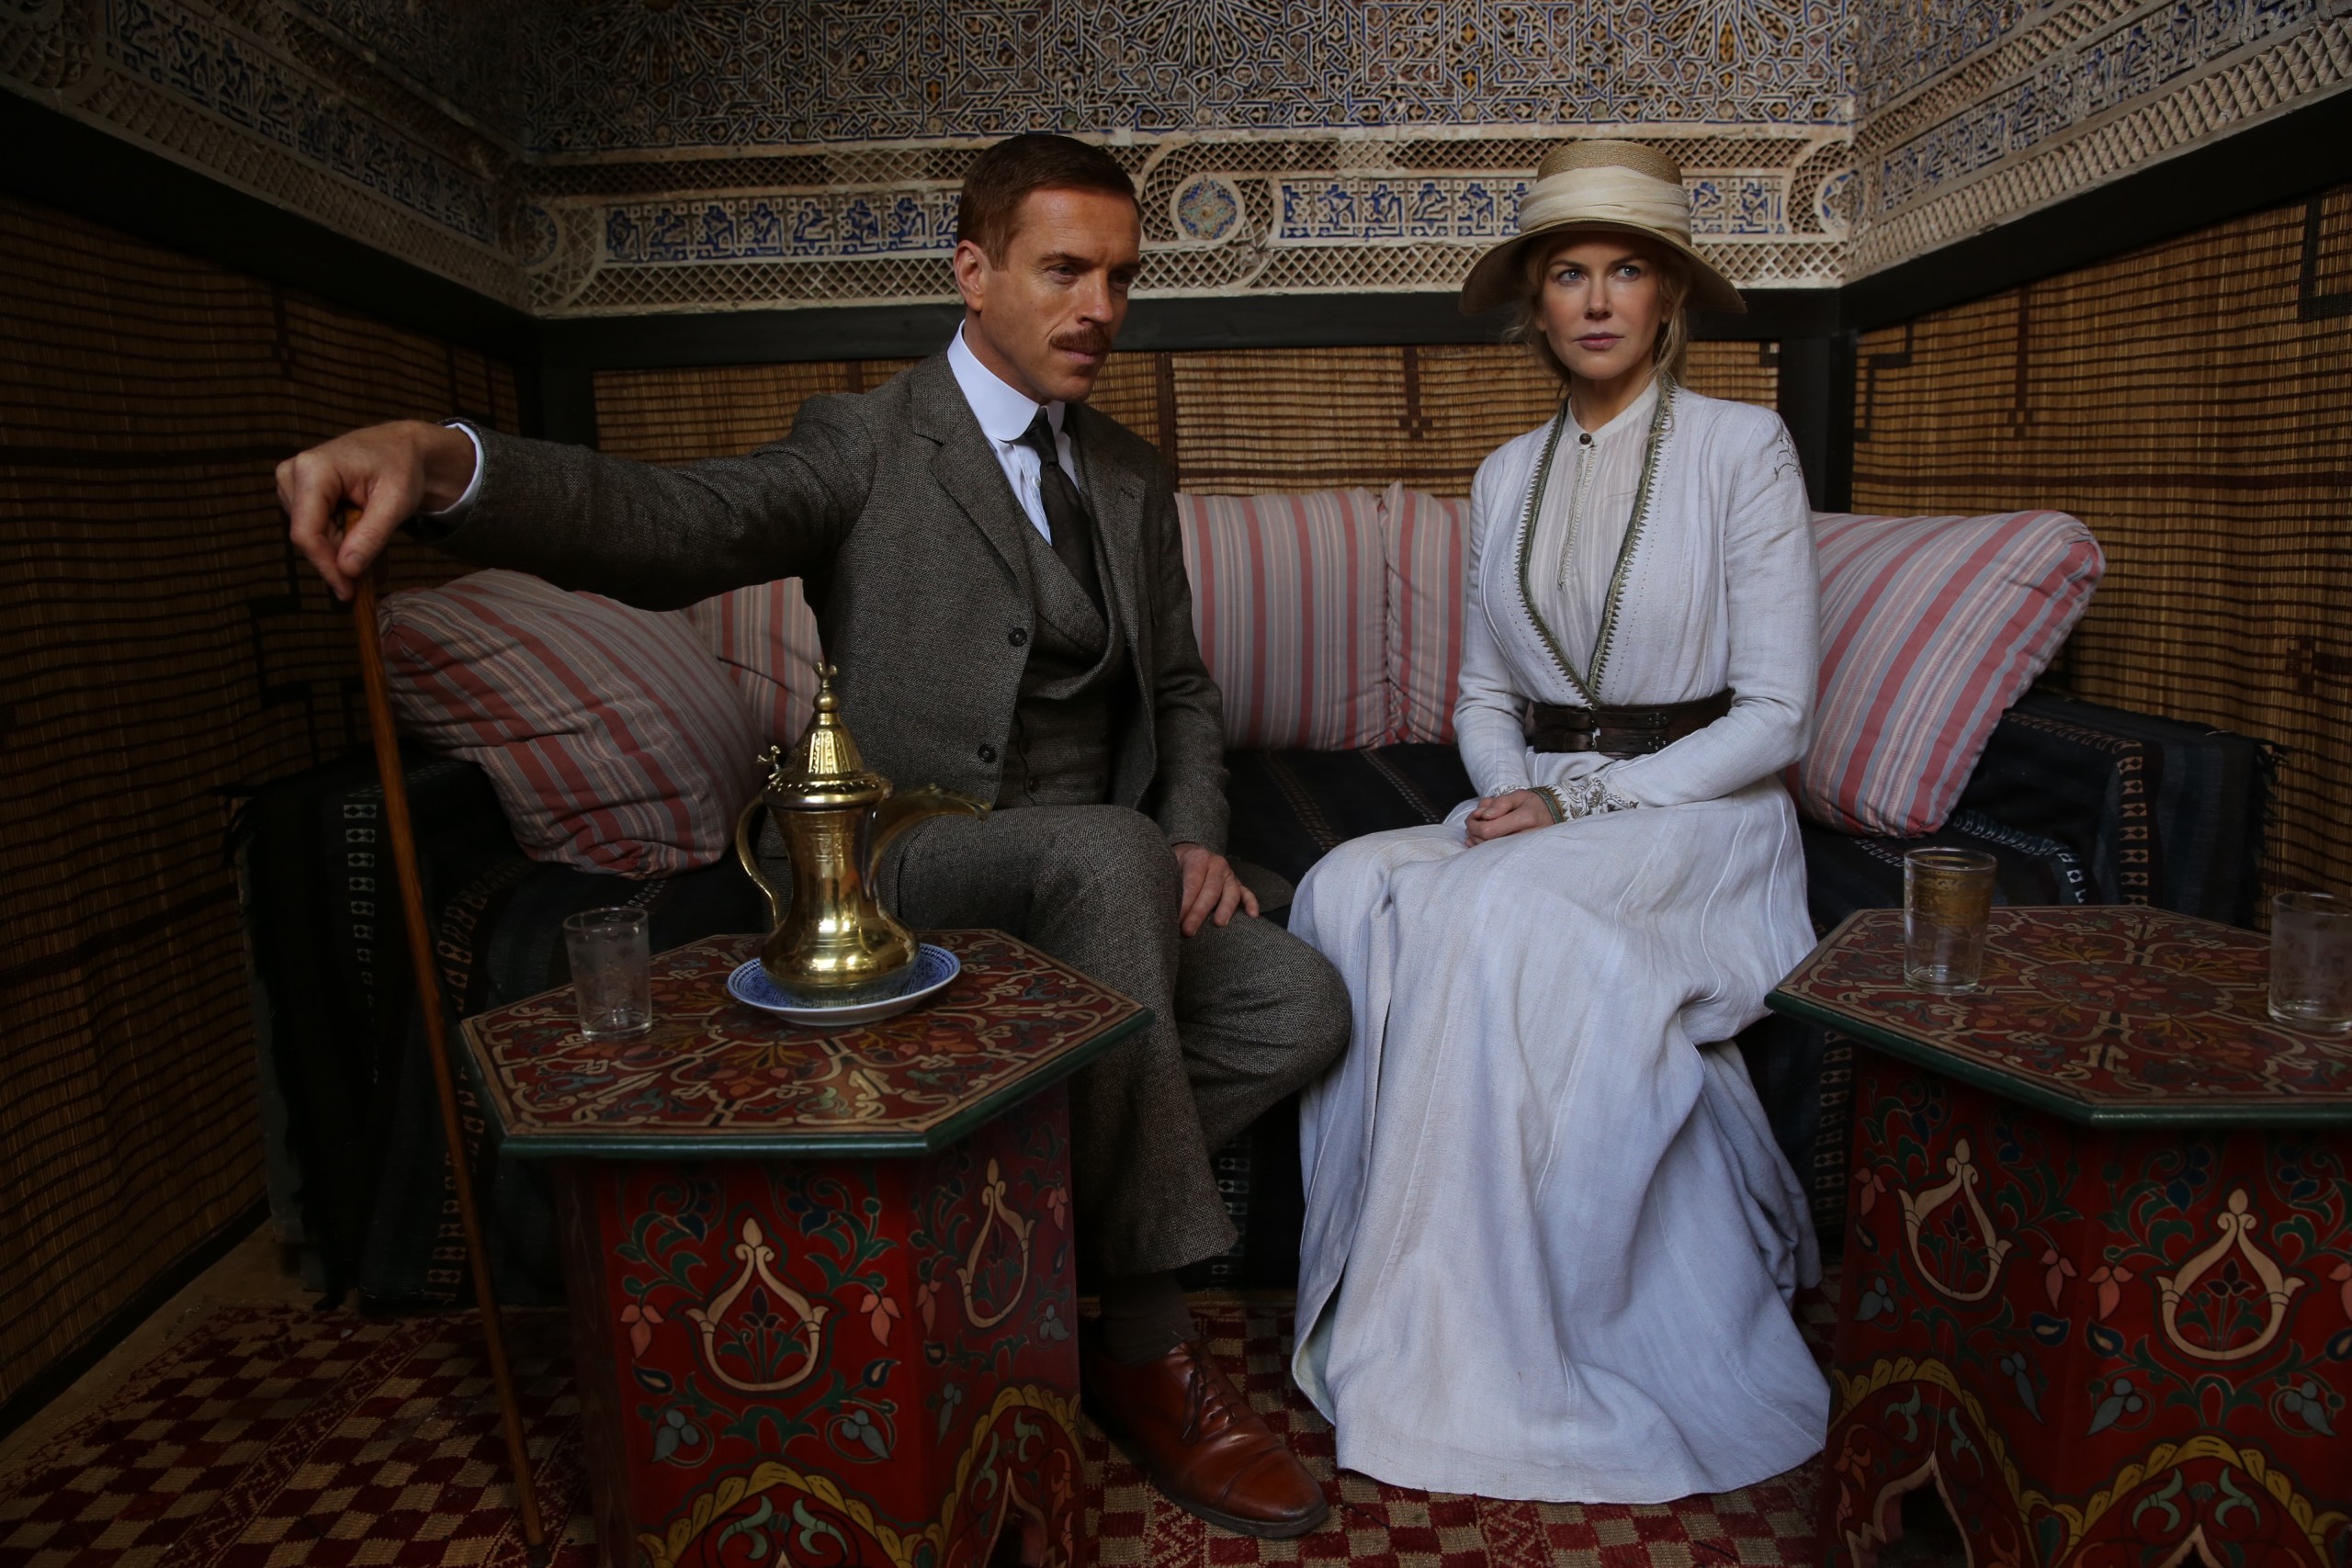 A man and a woman sit side by side on a corner bench in a small room. The woman is wearing a light-colored dress with a straw hat, the man a gray suit, his right hand resting on a stick. In front of them are small, ornate tables with drinks on them.